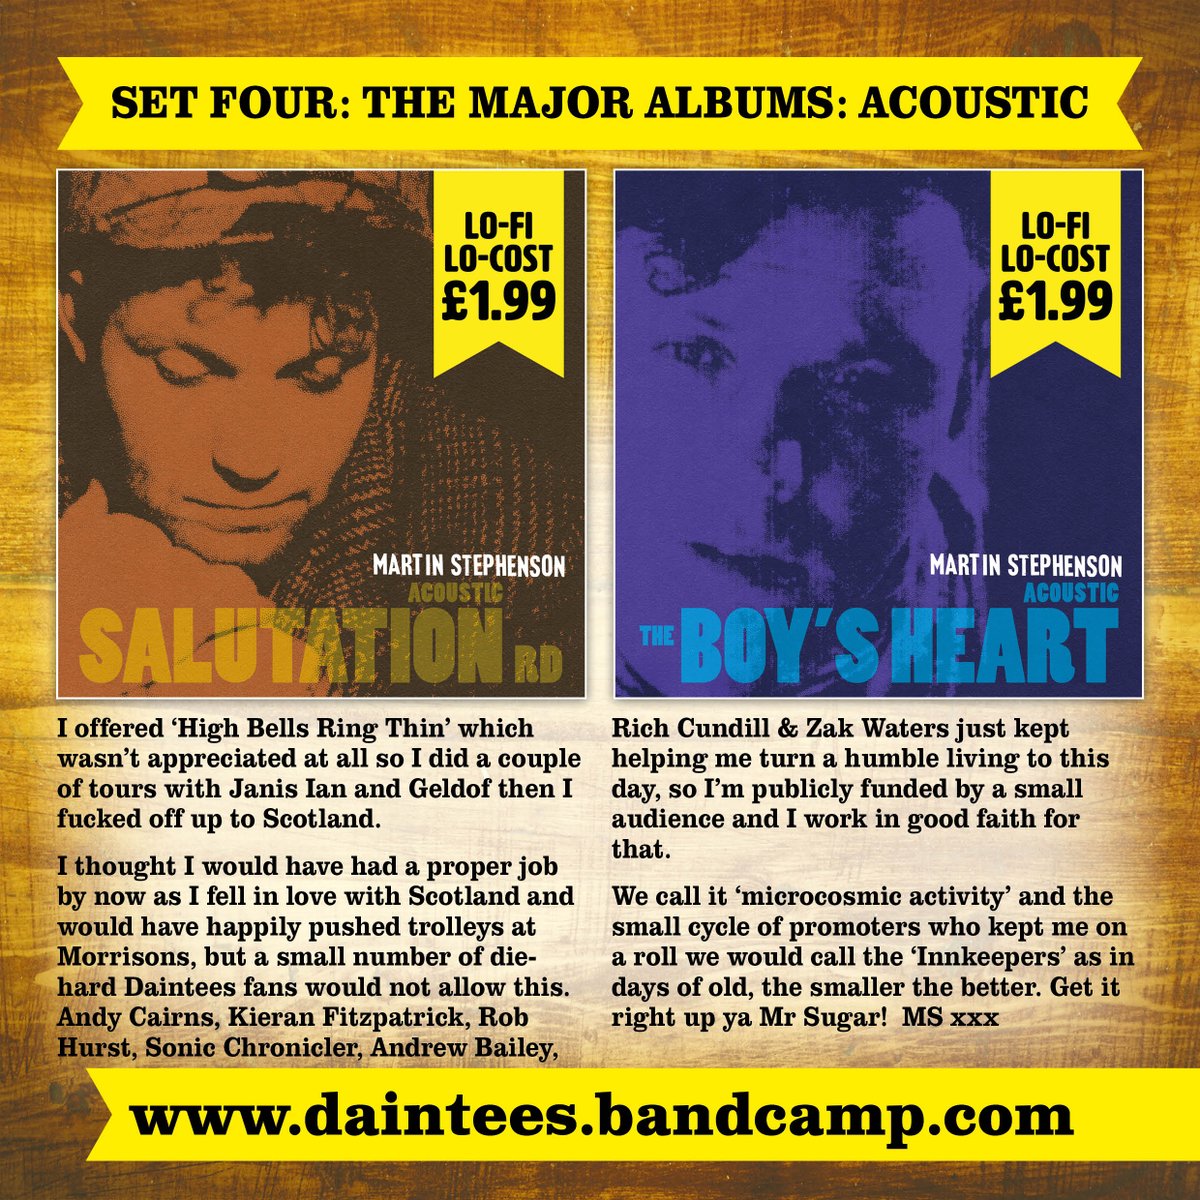 "Salutation Rd Acoustic" & "Boy's Heart Acoustic" (2011)A final few words from me on the four acoustic recordings of the major label releases .... Mx http://daintees.bandcamp.com 